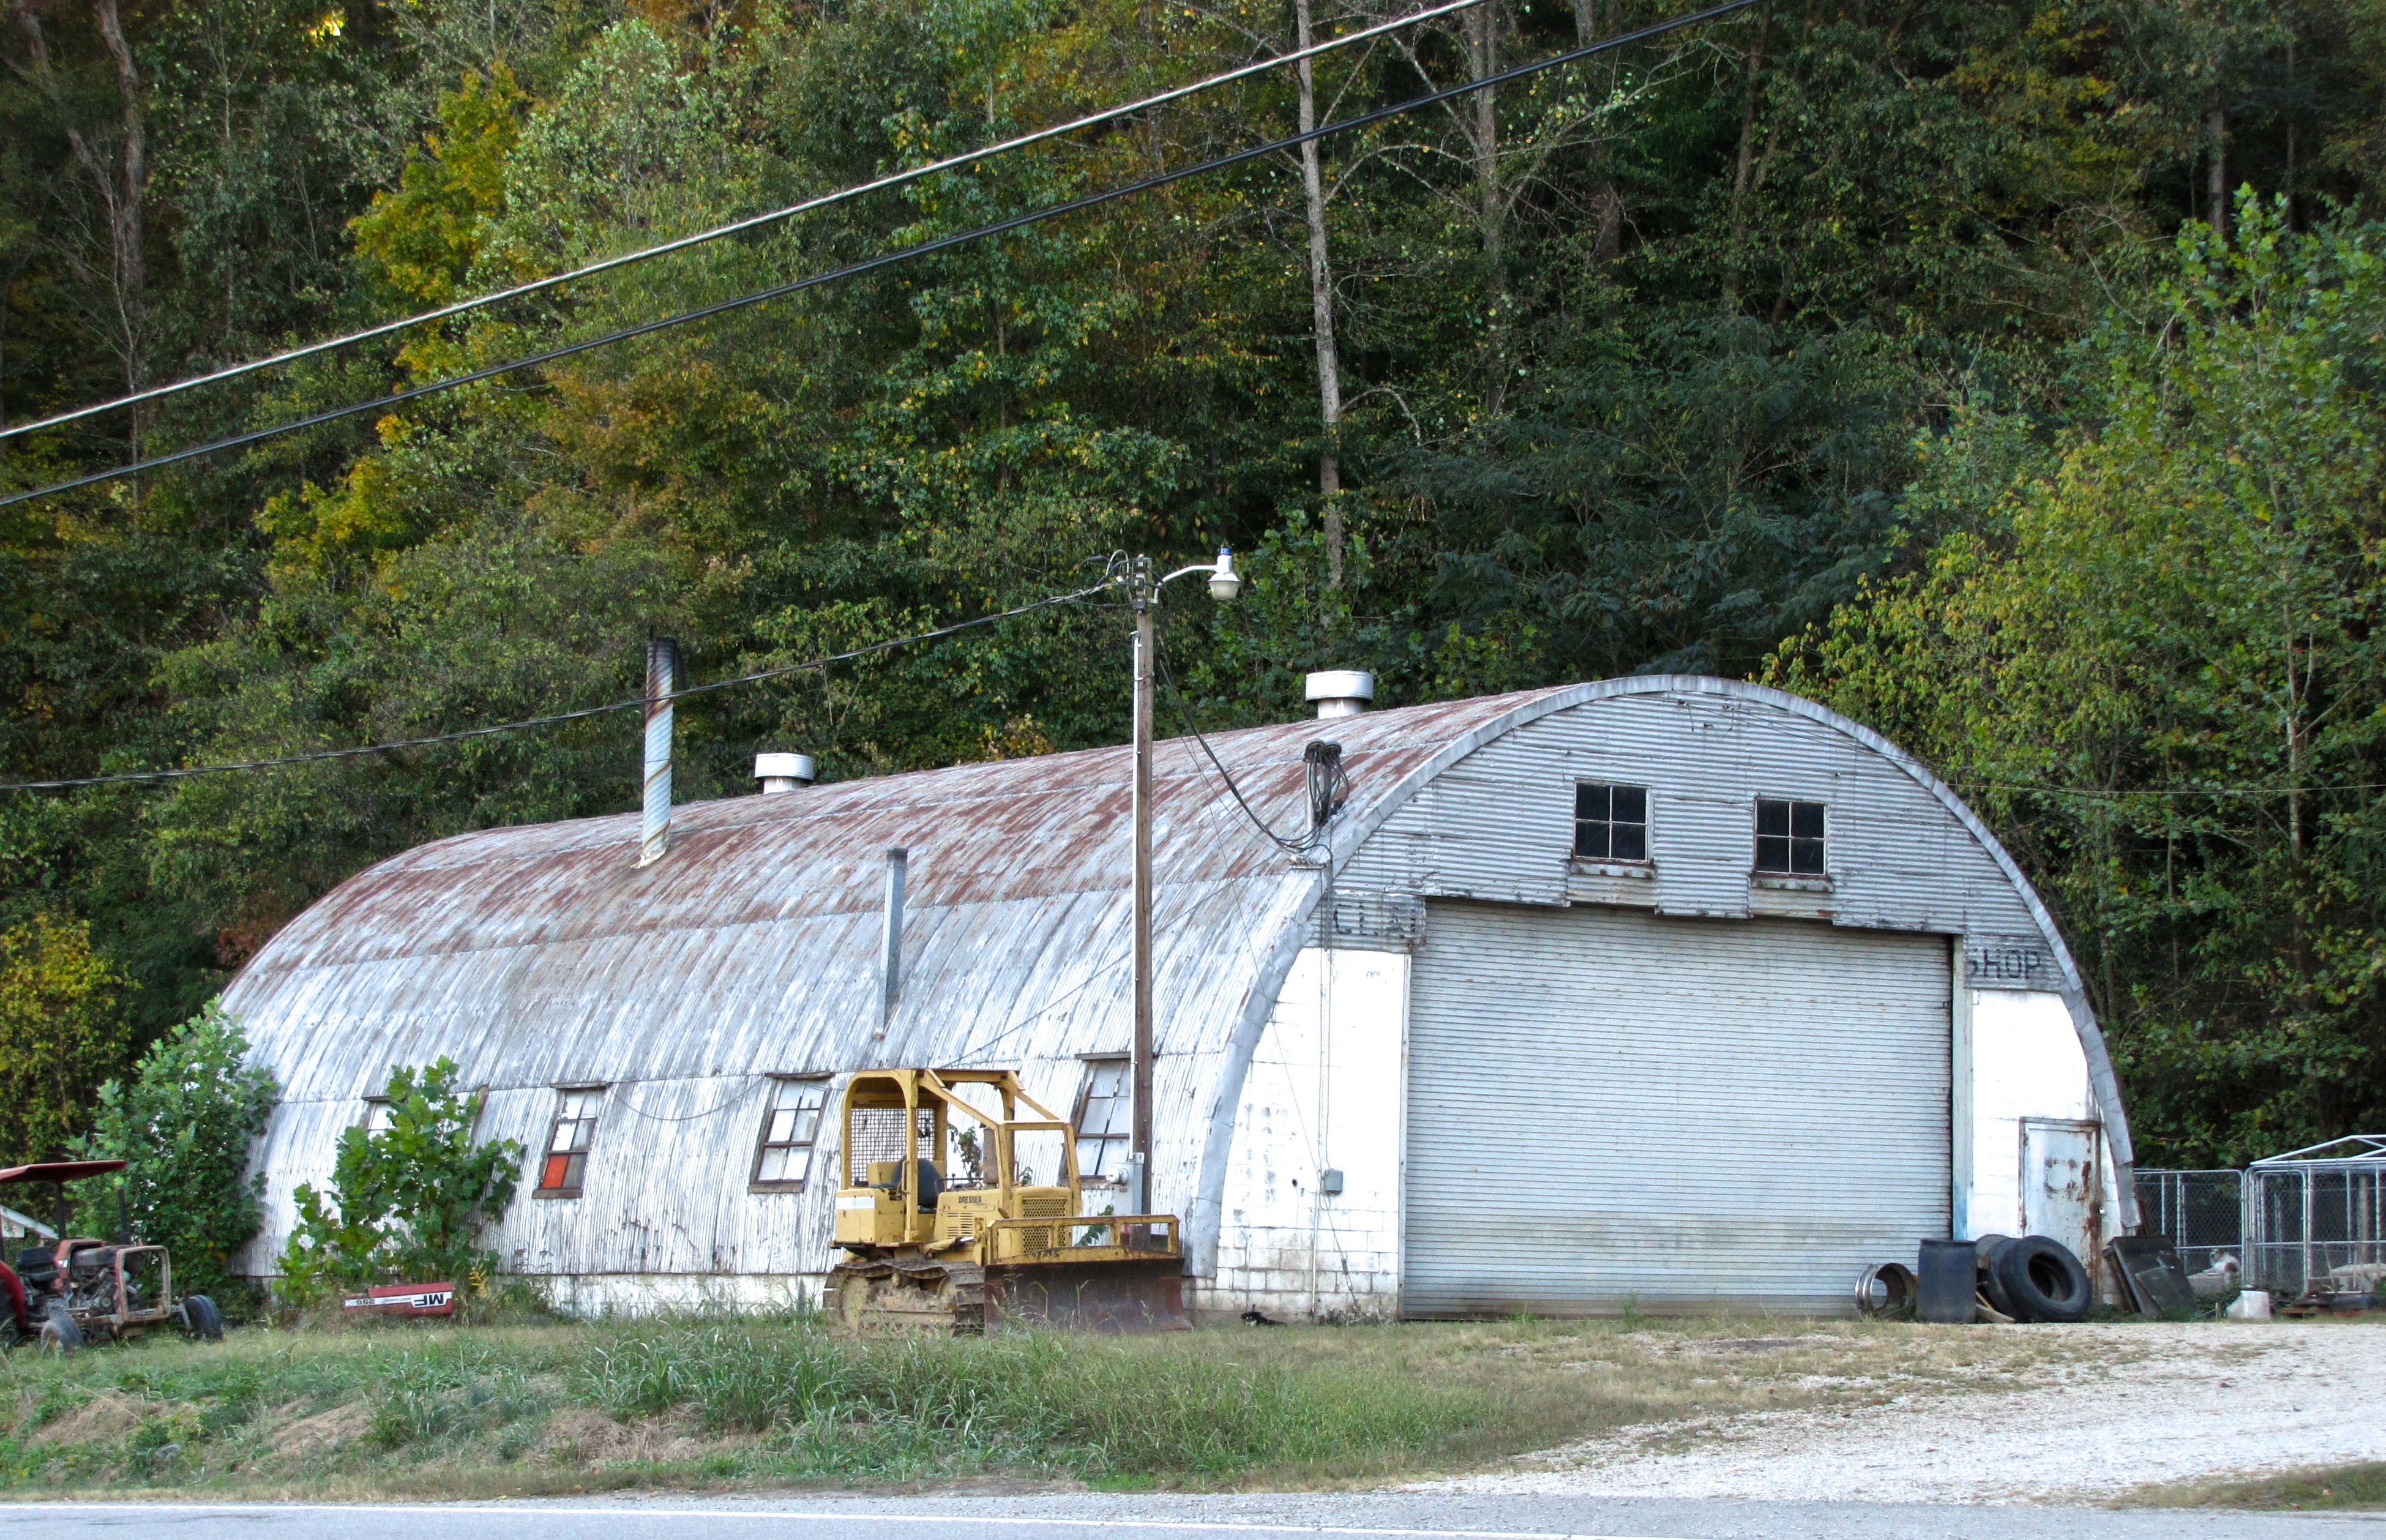 quonset hut in About Us, IL